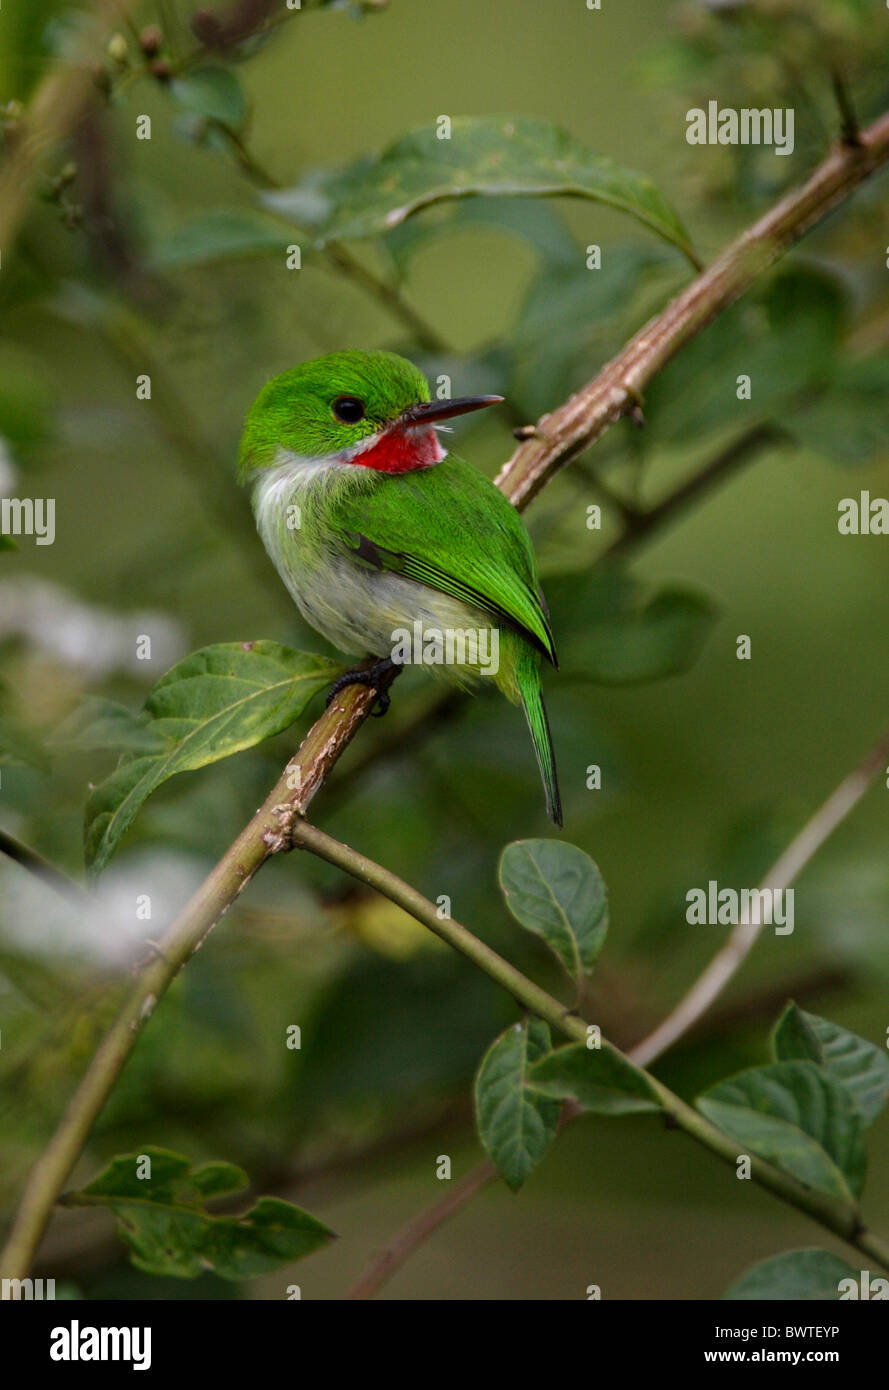 Jamaican Tody (Todus todus) adult, perched on twig, Marshall's Pen, Jamaica, december Stock Photo